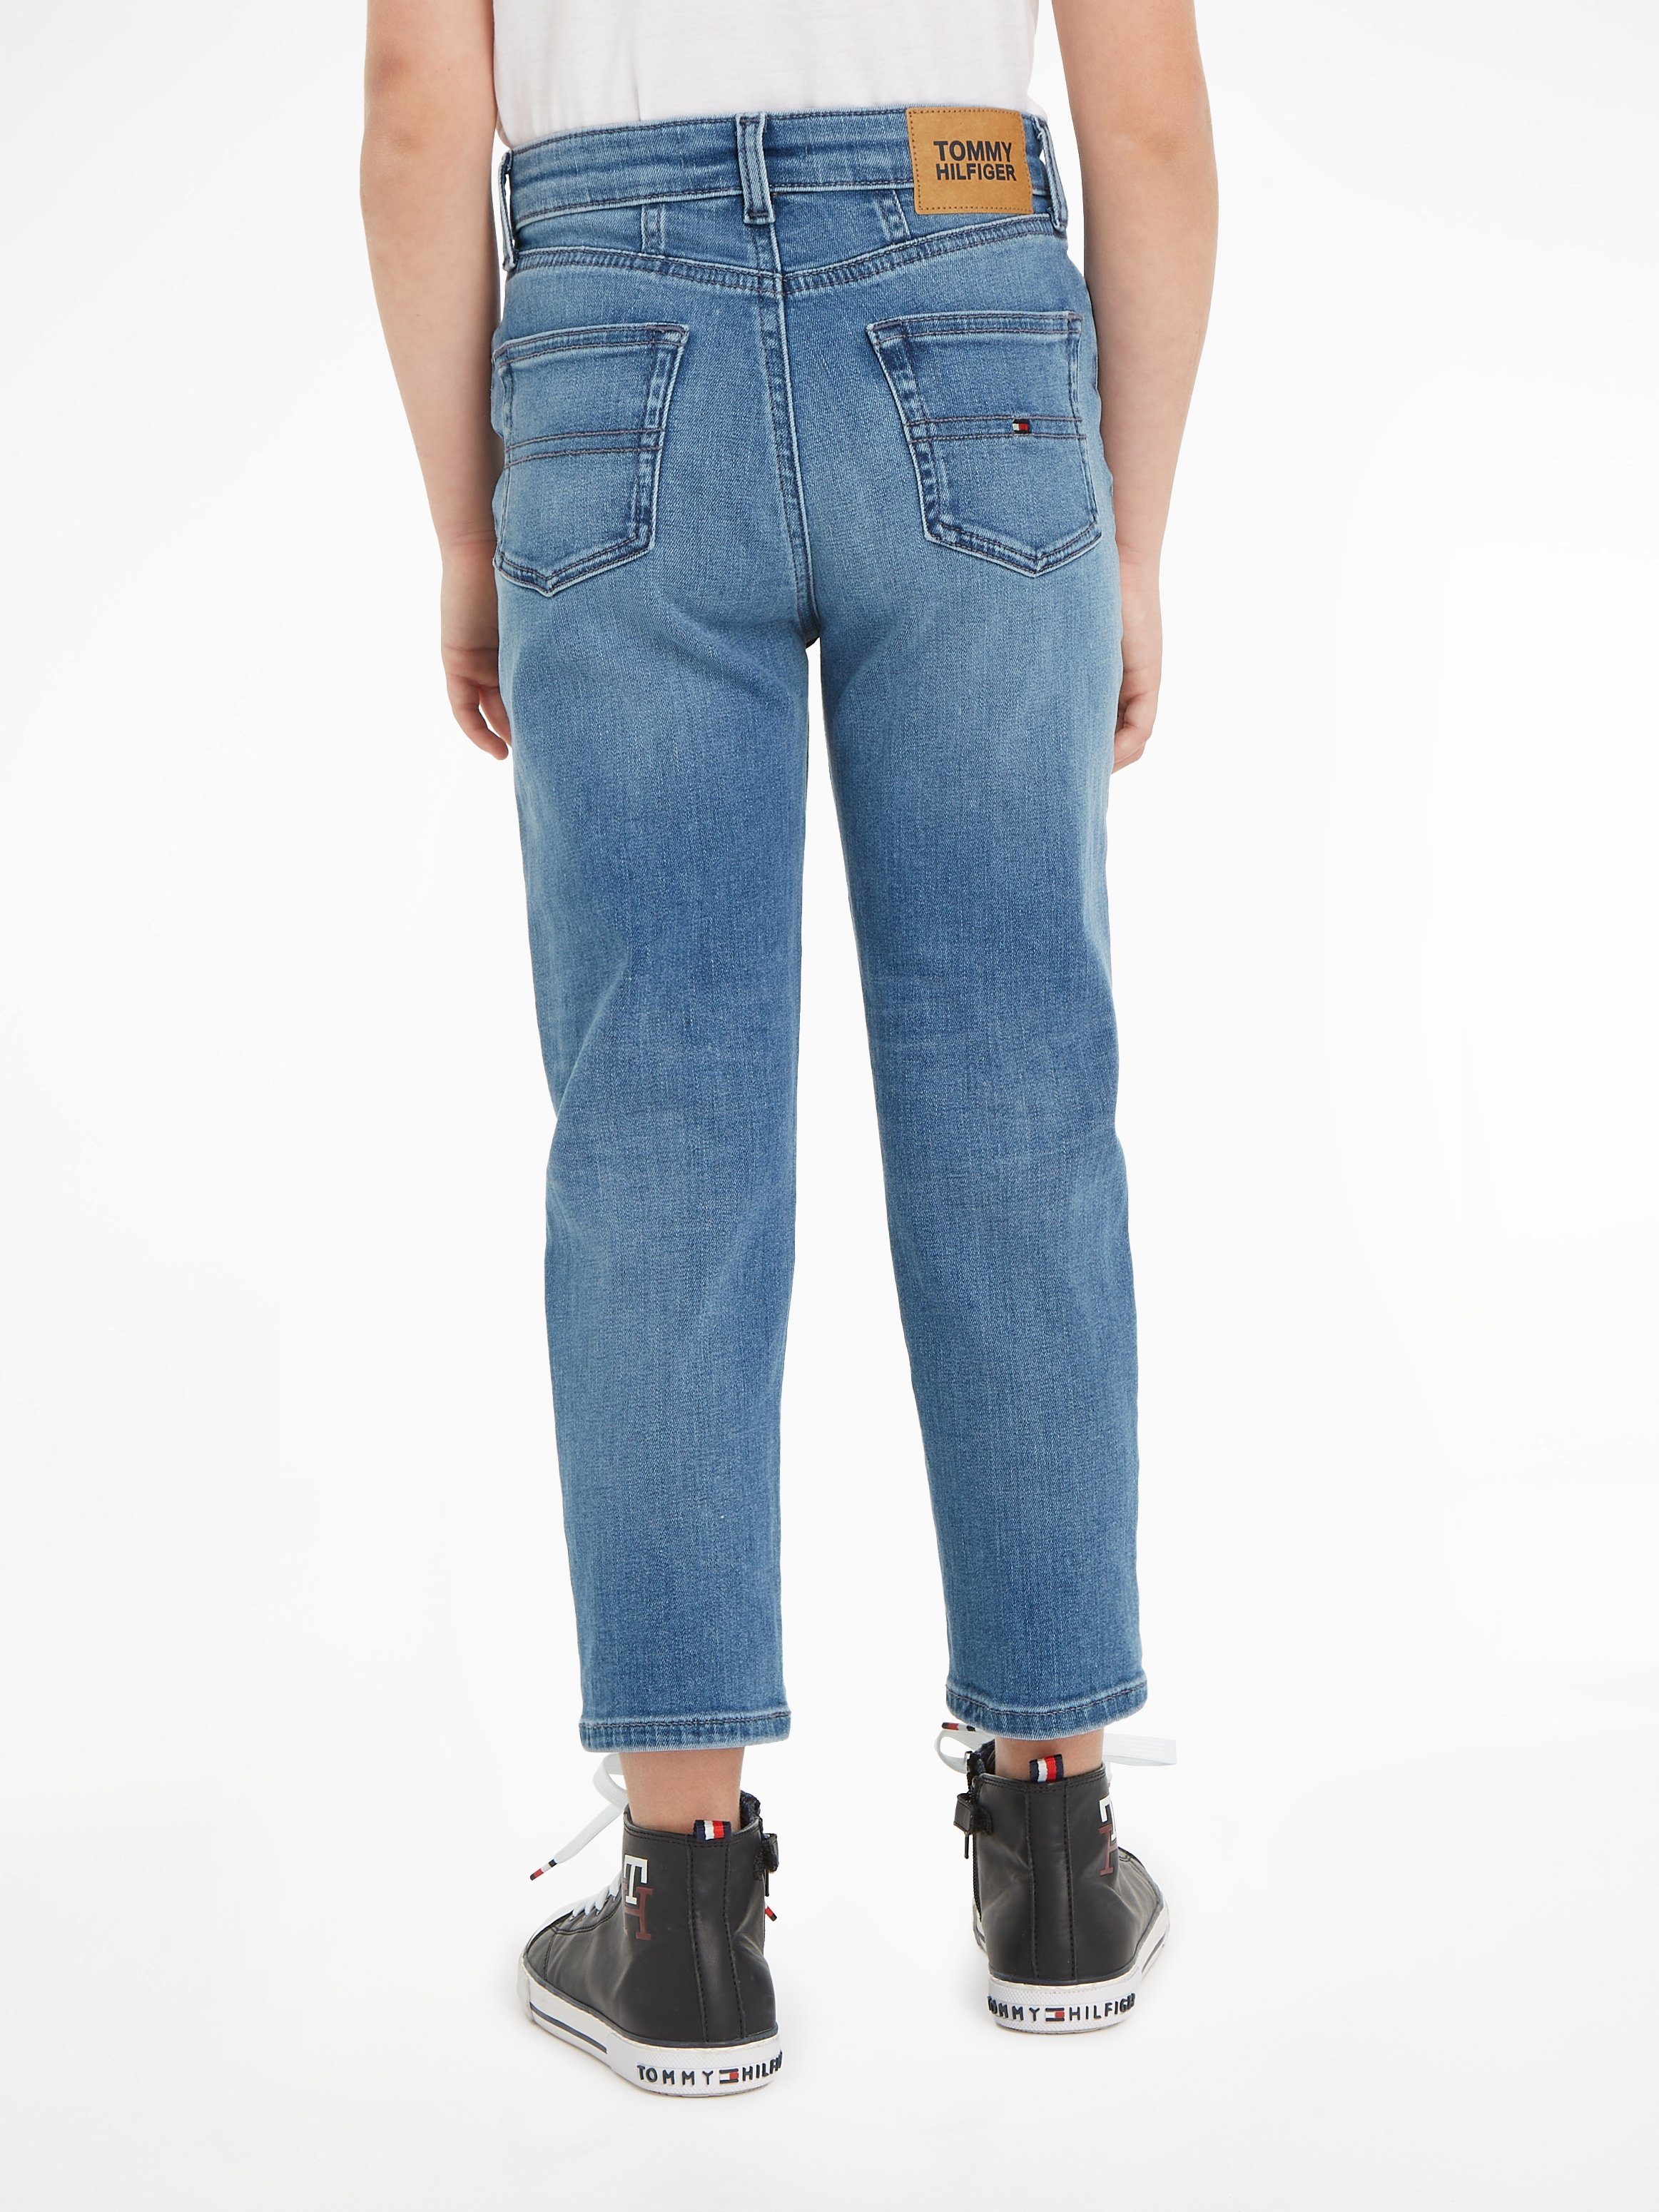 Tommy Hilfiger Tapered jeans HR TAPERED in 7 8 lengte